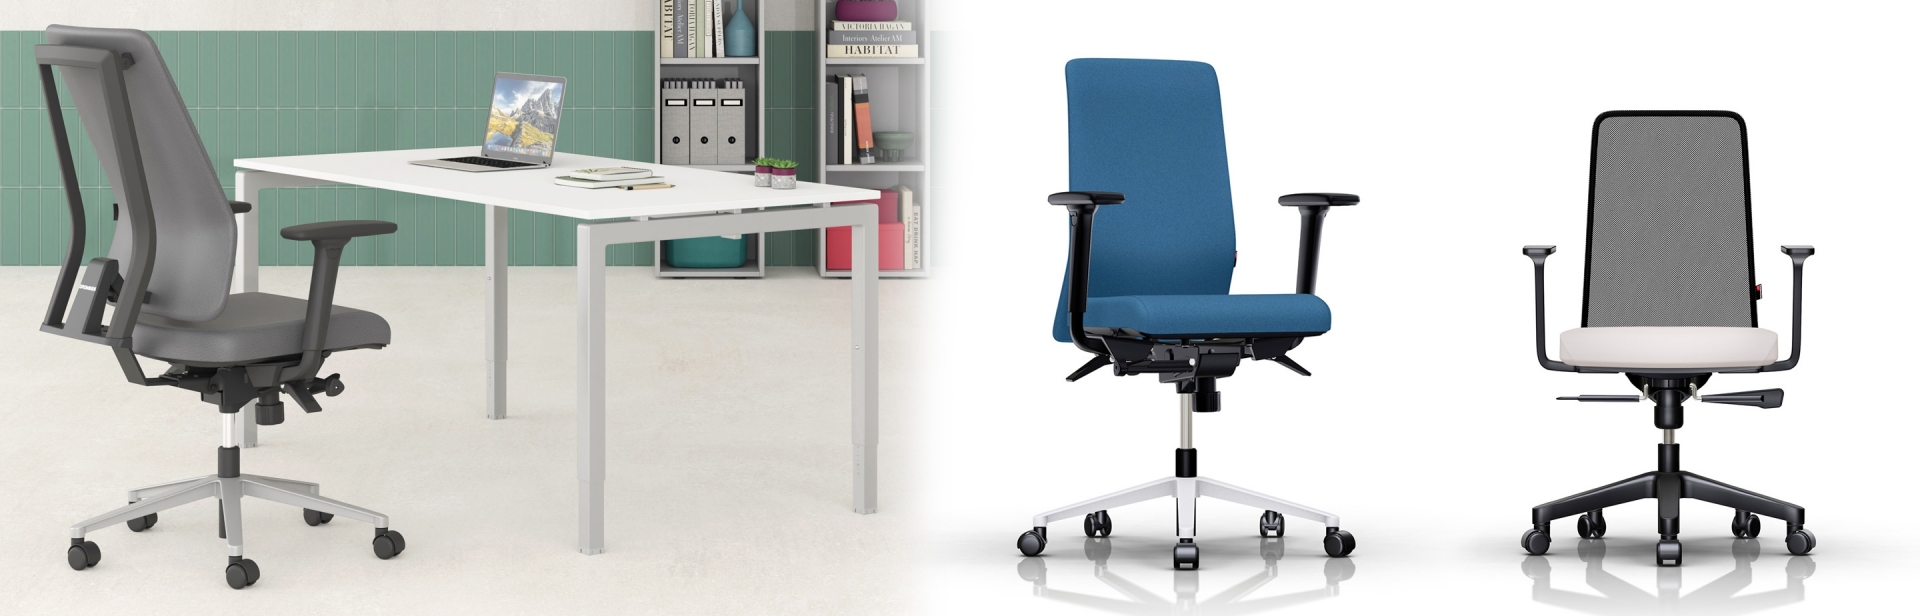 Dromeas Work Chairs & Seats With 5 Year Warranty